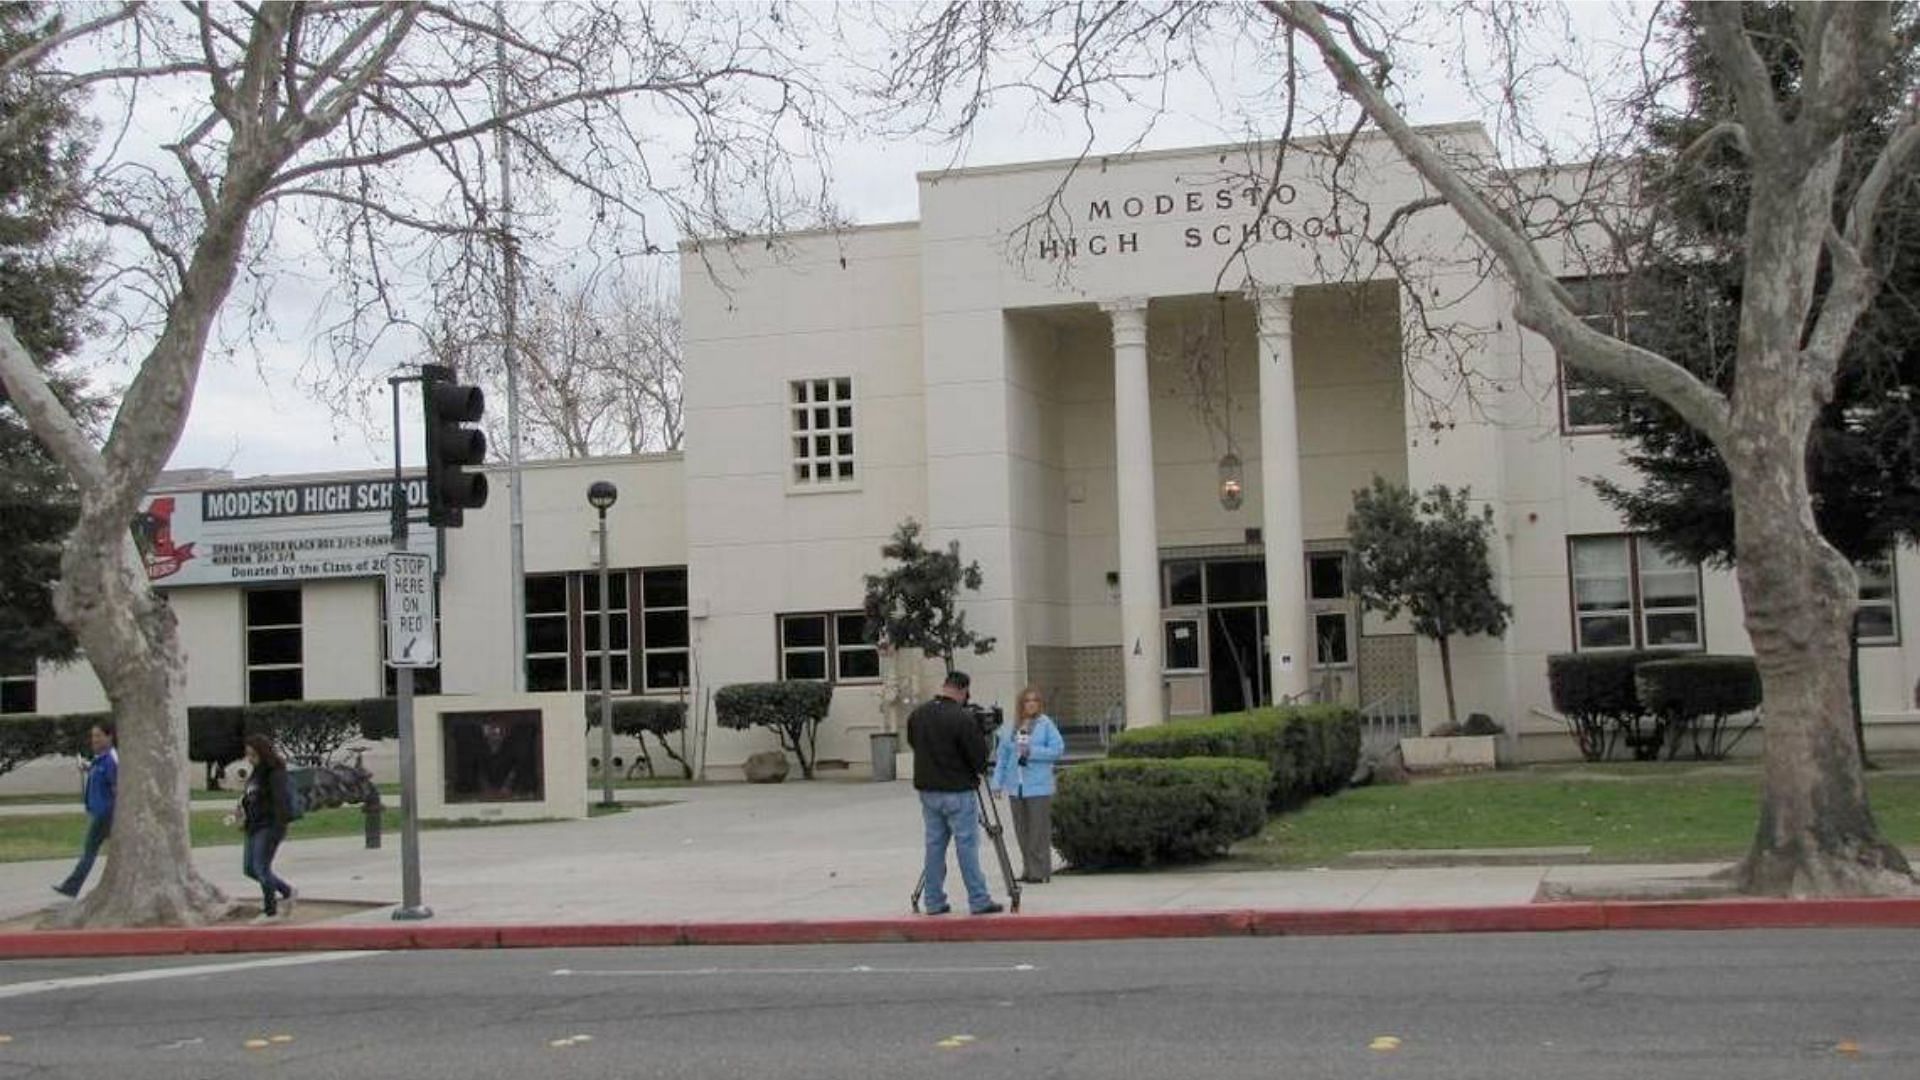 Modesto High School under the limelight for staff misconduct on campus (image via Facebook/Modesto City Schools)